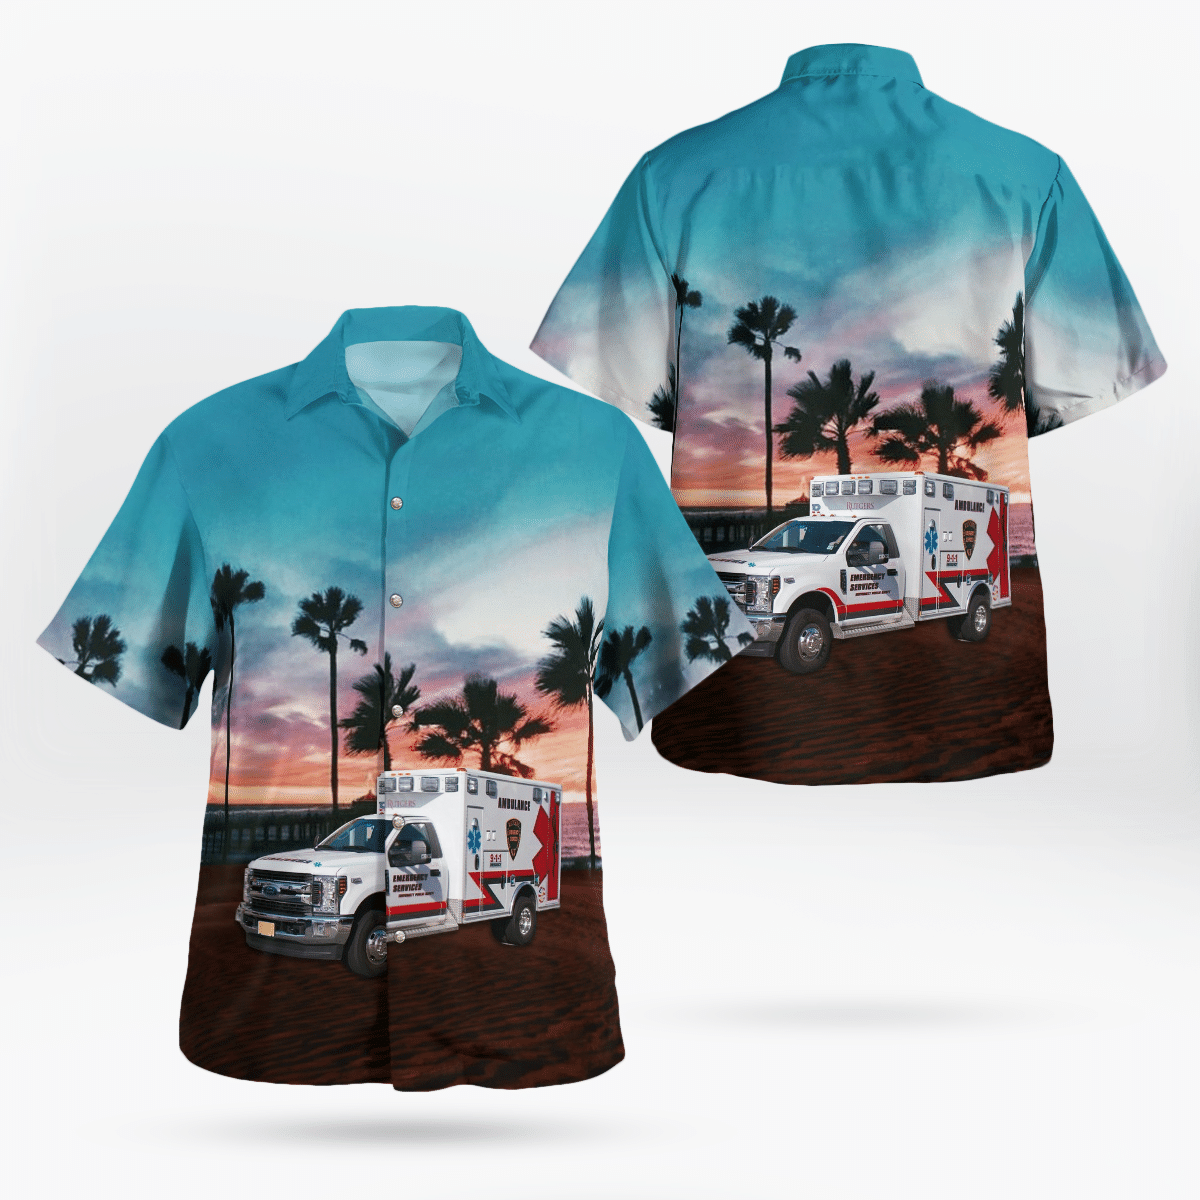 Shop now to find the perfect Hawaii Shirt for your hobby 21